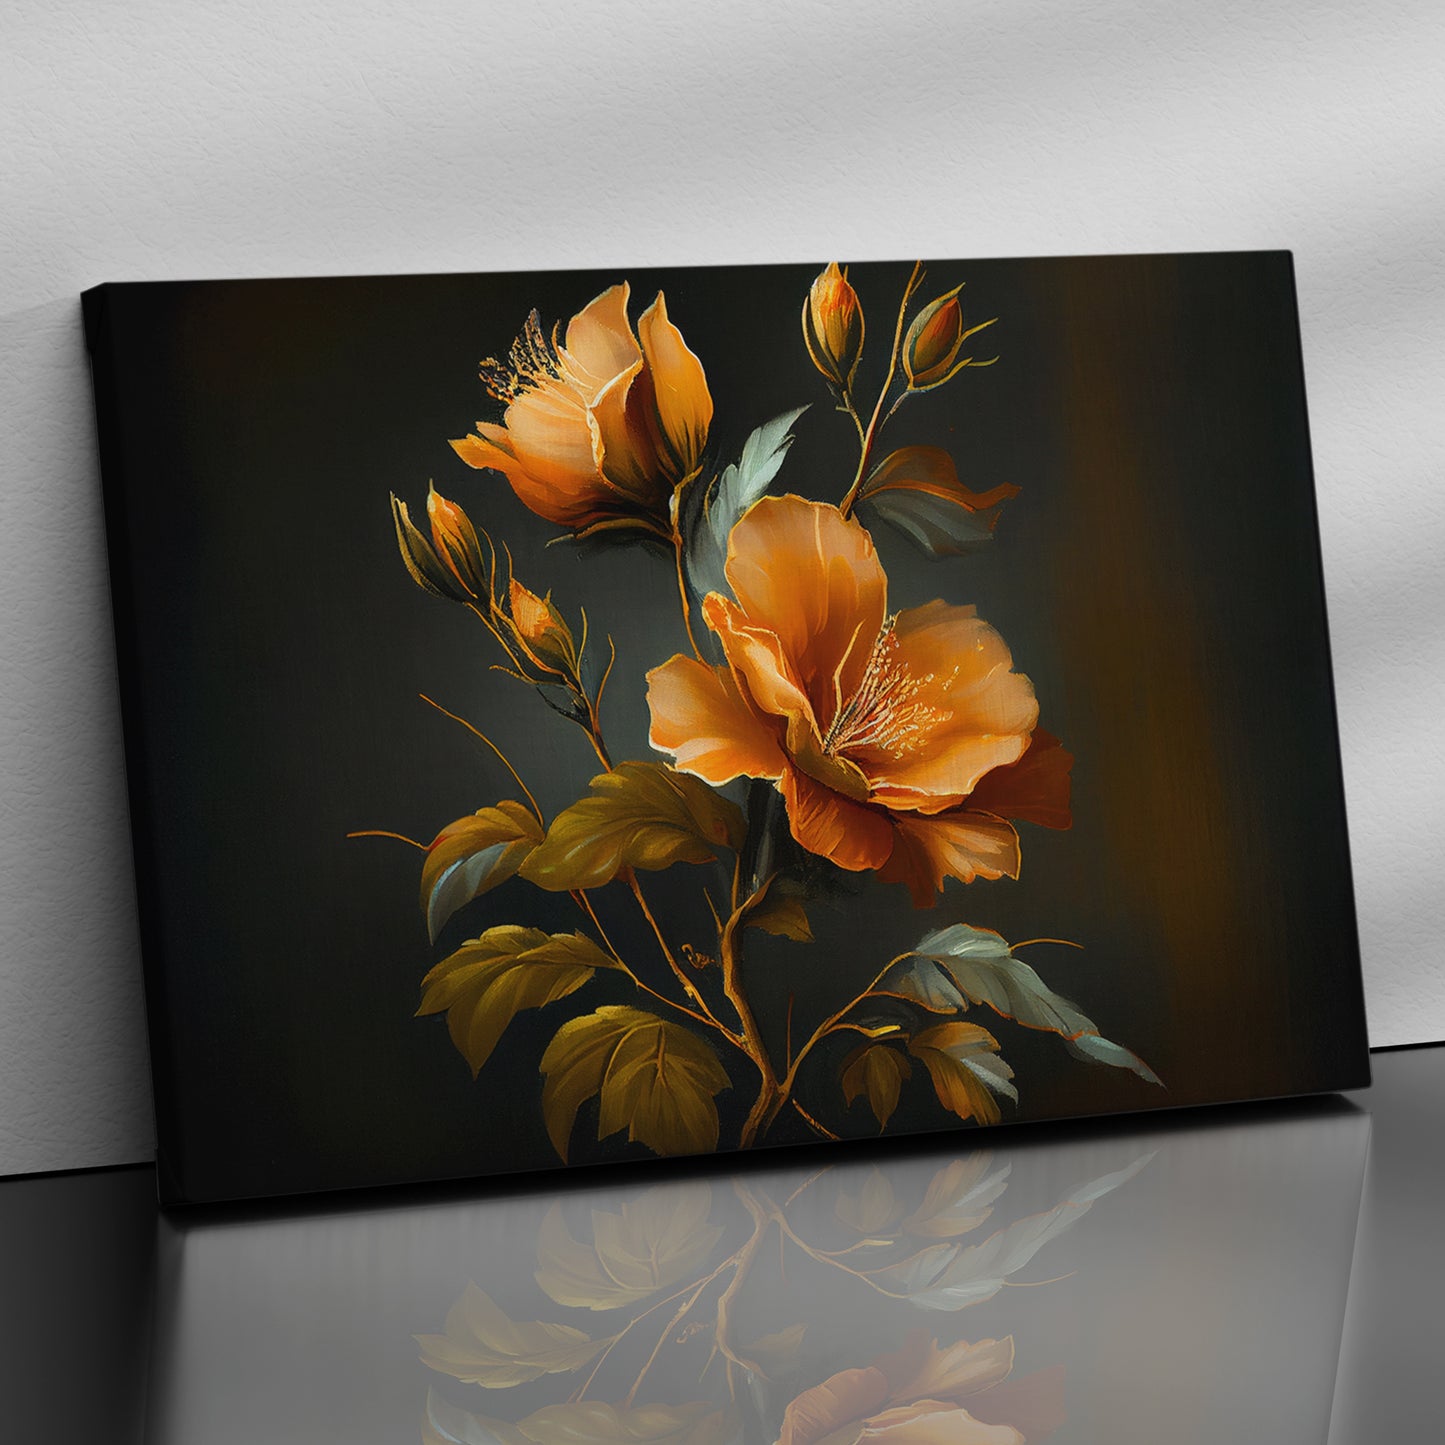 Floral Canvas Paintings for Living Room Bedroom Wall Decor - Paintings for Home Decor